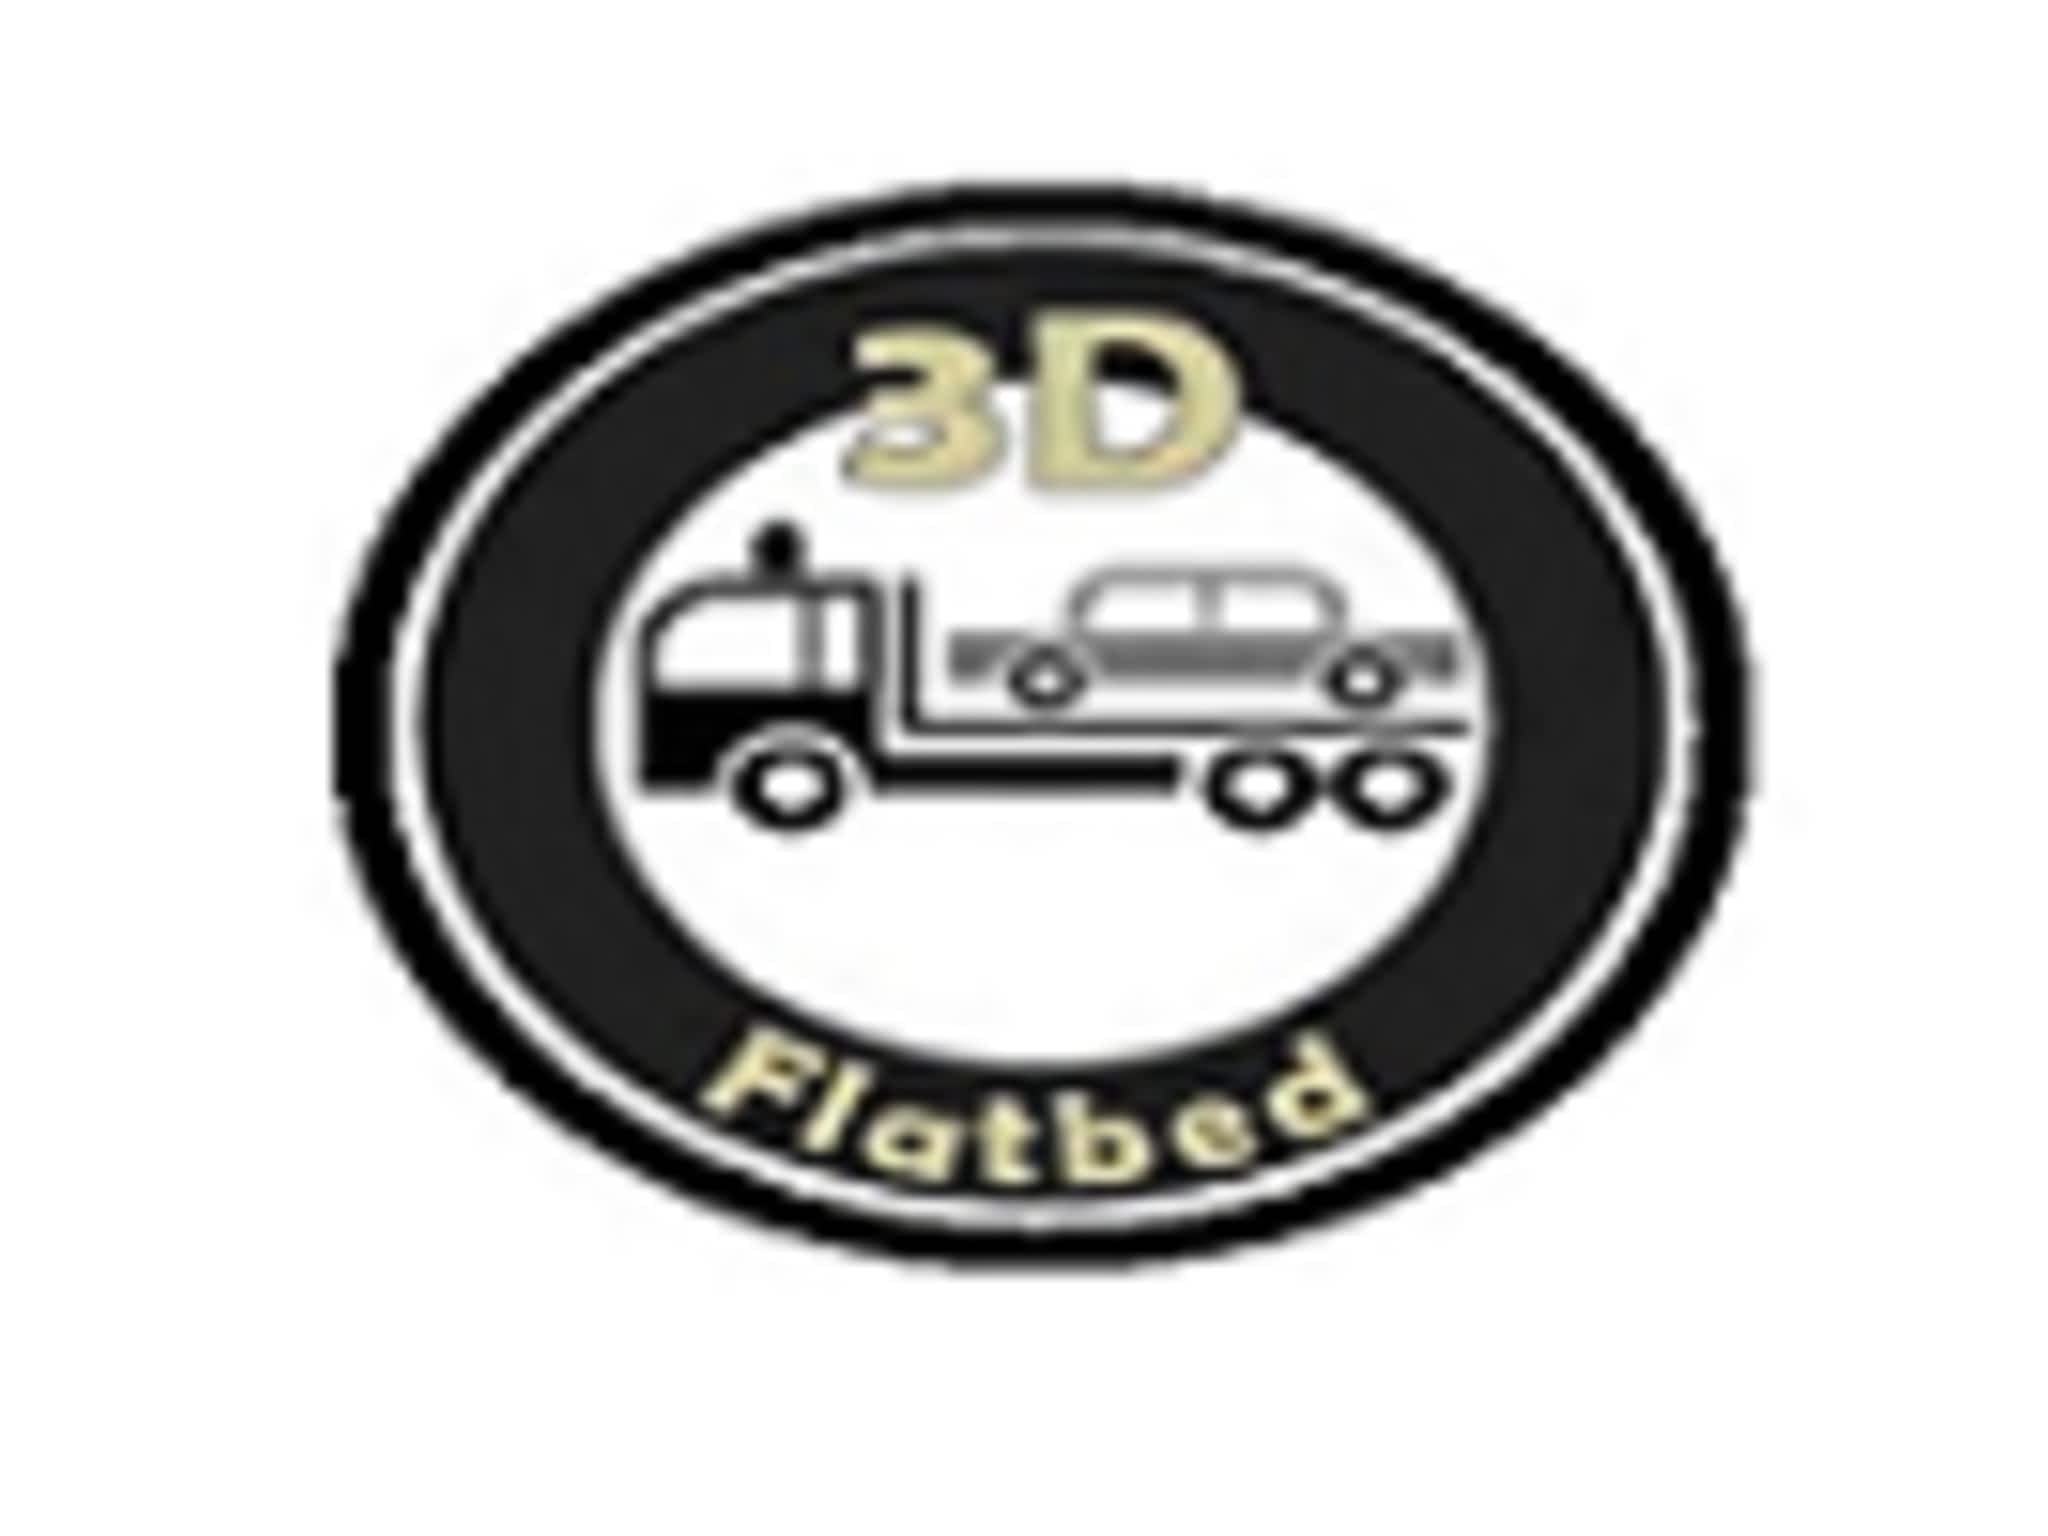 photo 3D Flatbed